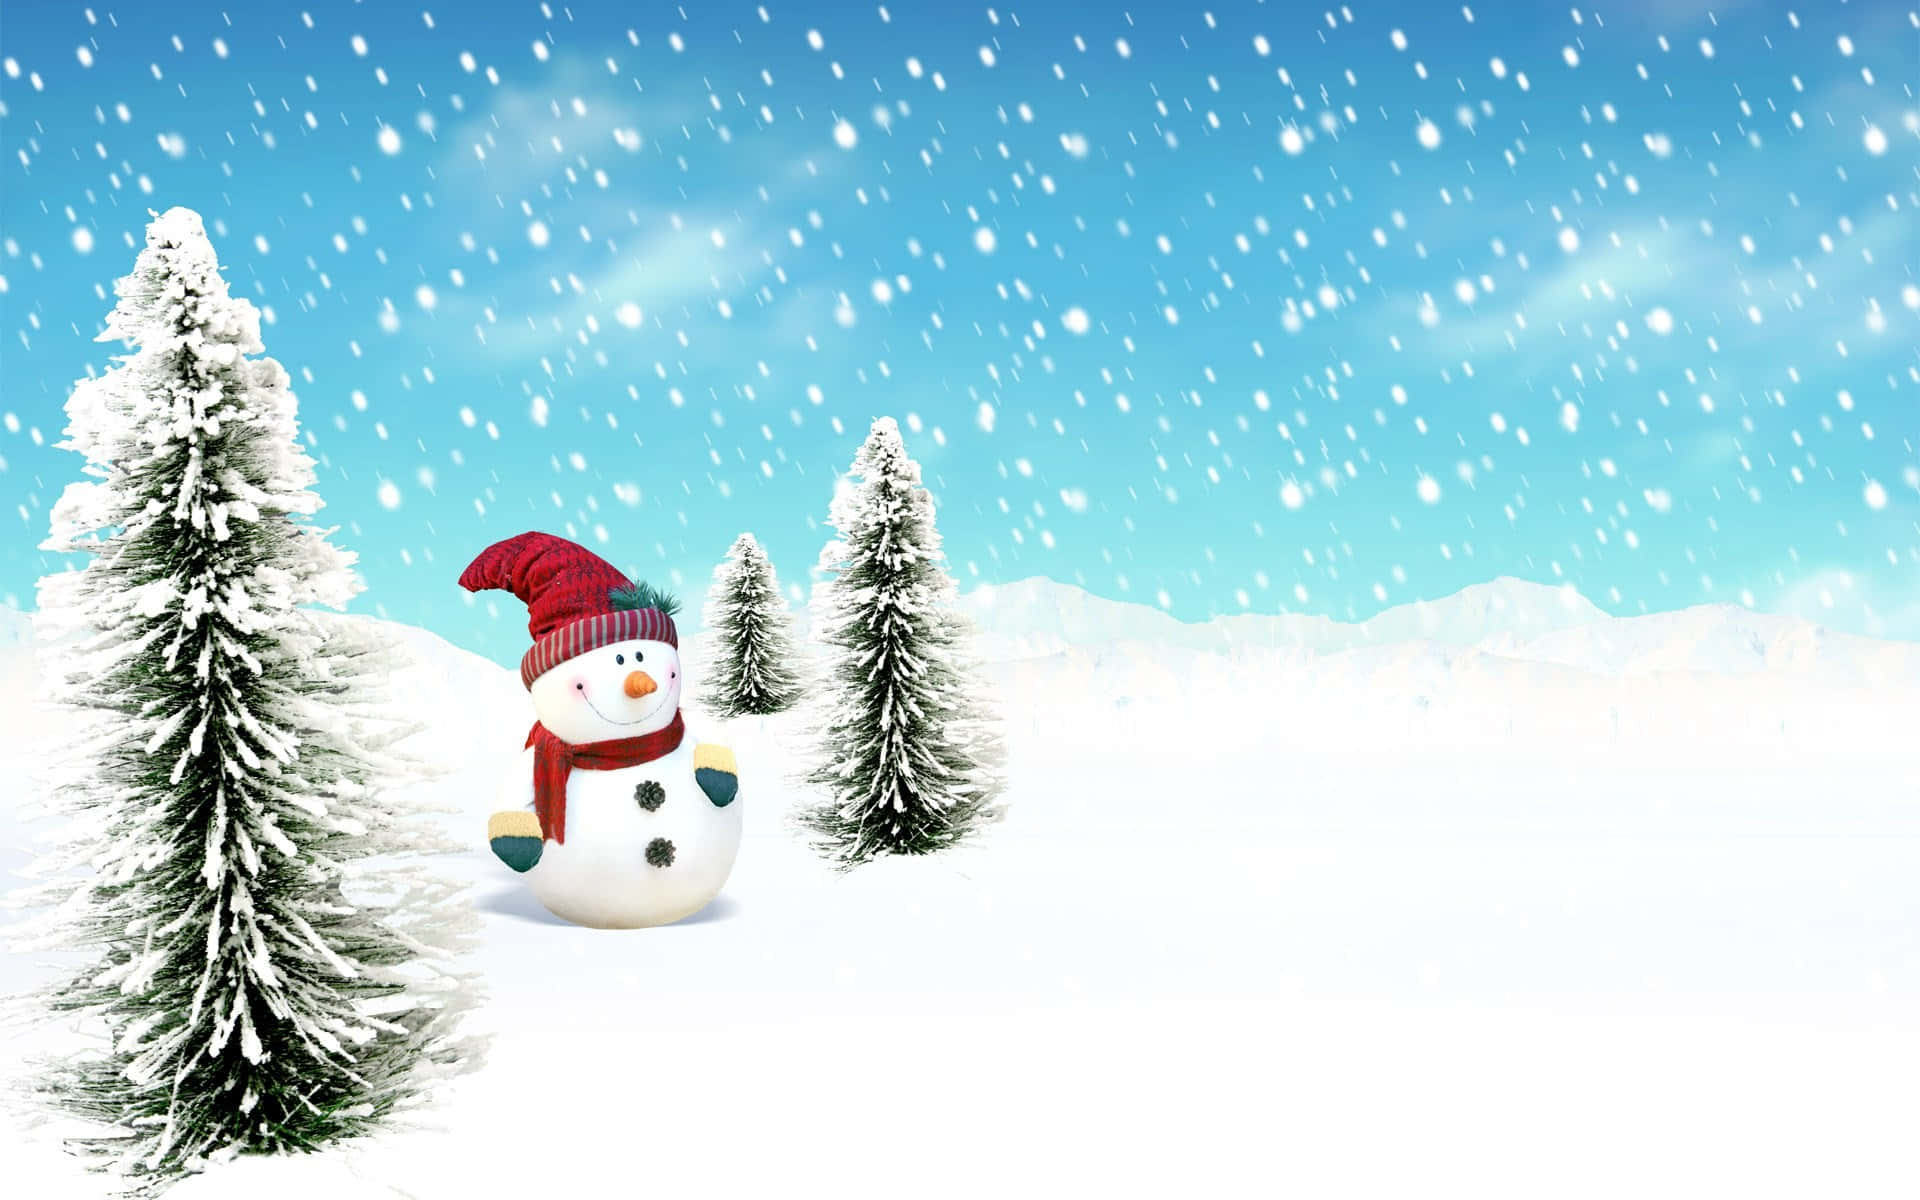 Enjoy The Festive Holiday Season With A High Resolution Christmas Background